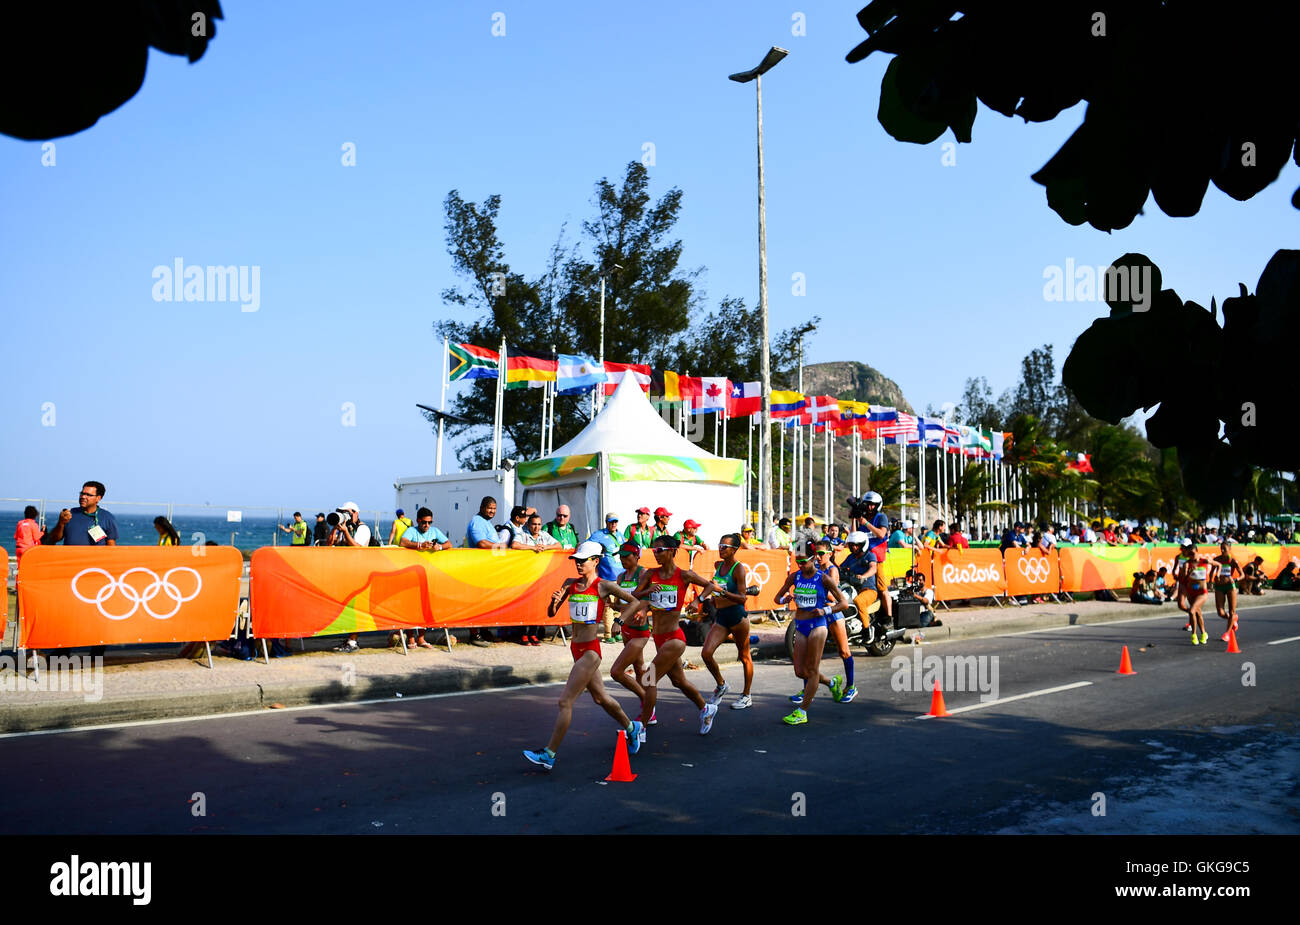 Rio de Janeiro, Brazil. 19th August, 2016. Xiuzhi Lu of China during the womens 20km race walk on Day 14 of the 2016 Rio Olympics at Pontal on August 19, 2016 in Rio de Janeiro, Brazil. (Photo by Roger Sedres/Gallo Images) Credit:  Roger Sedres/Alamy Live News Stock Photo